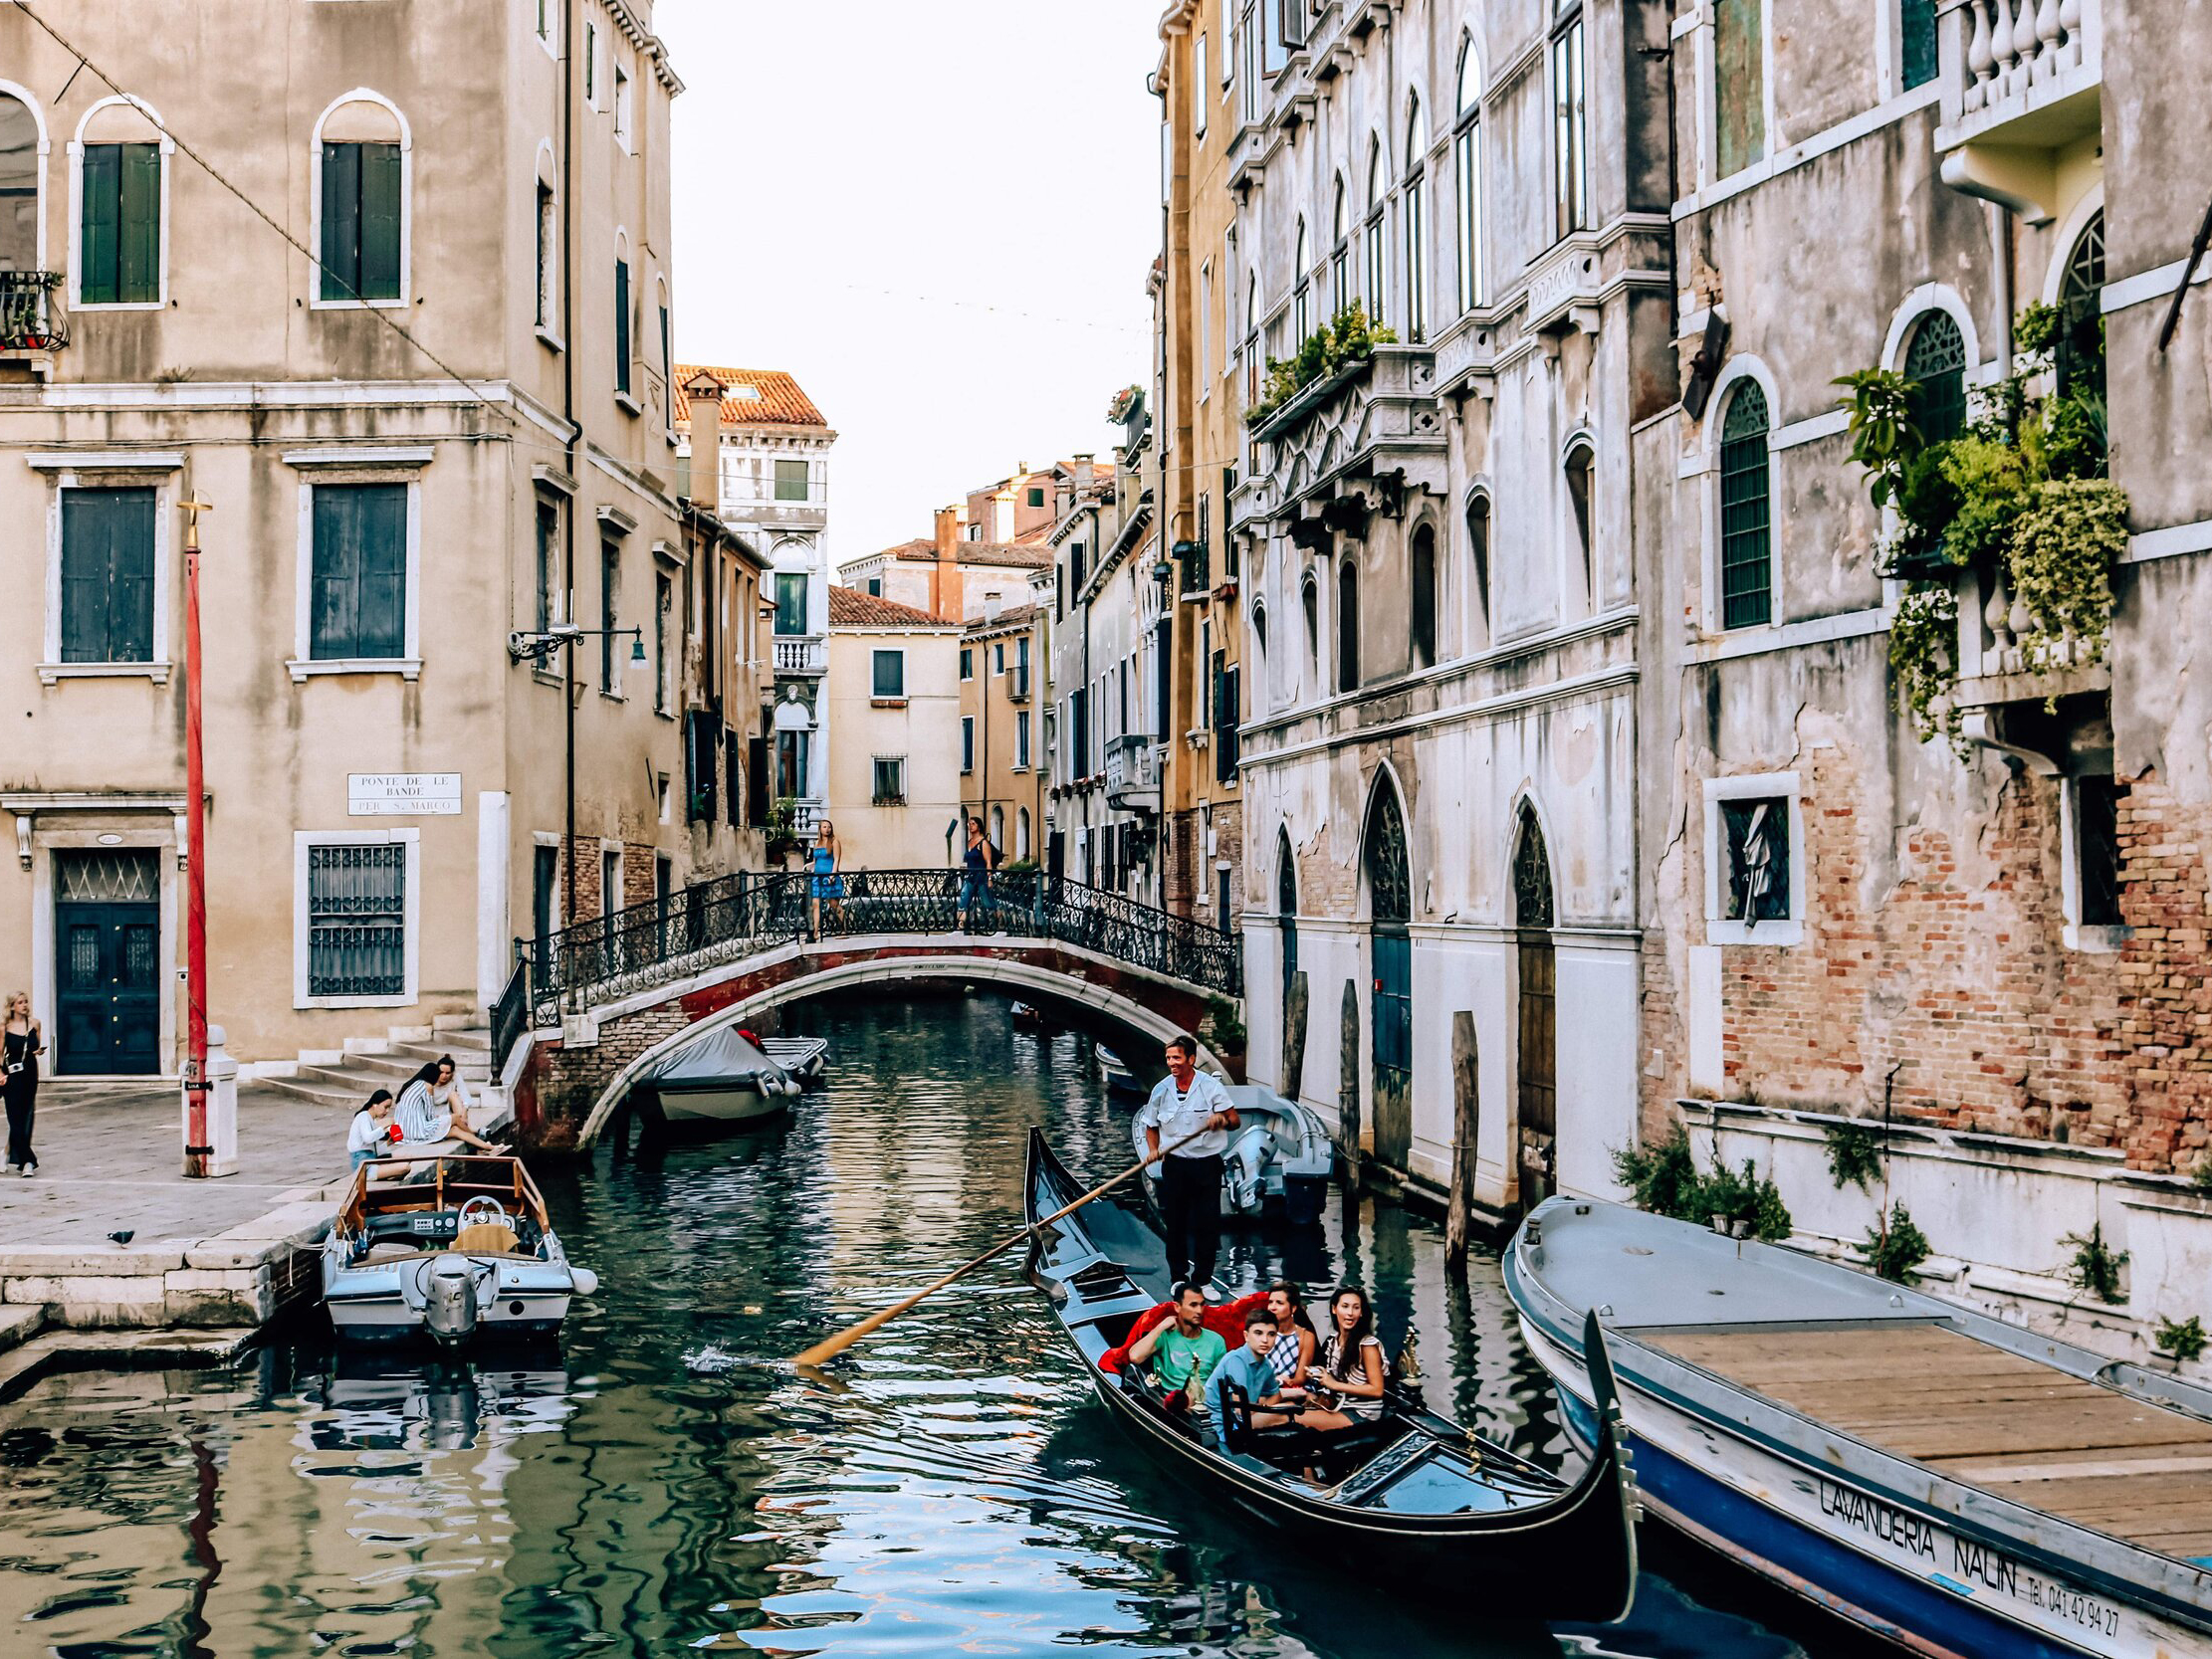 Best Destination for first Europe Trip - Venice, Italy